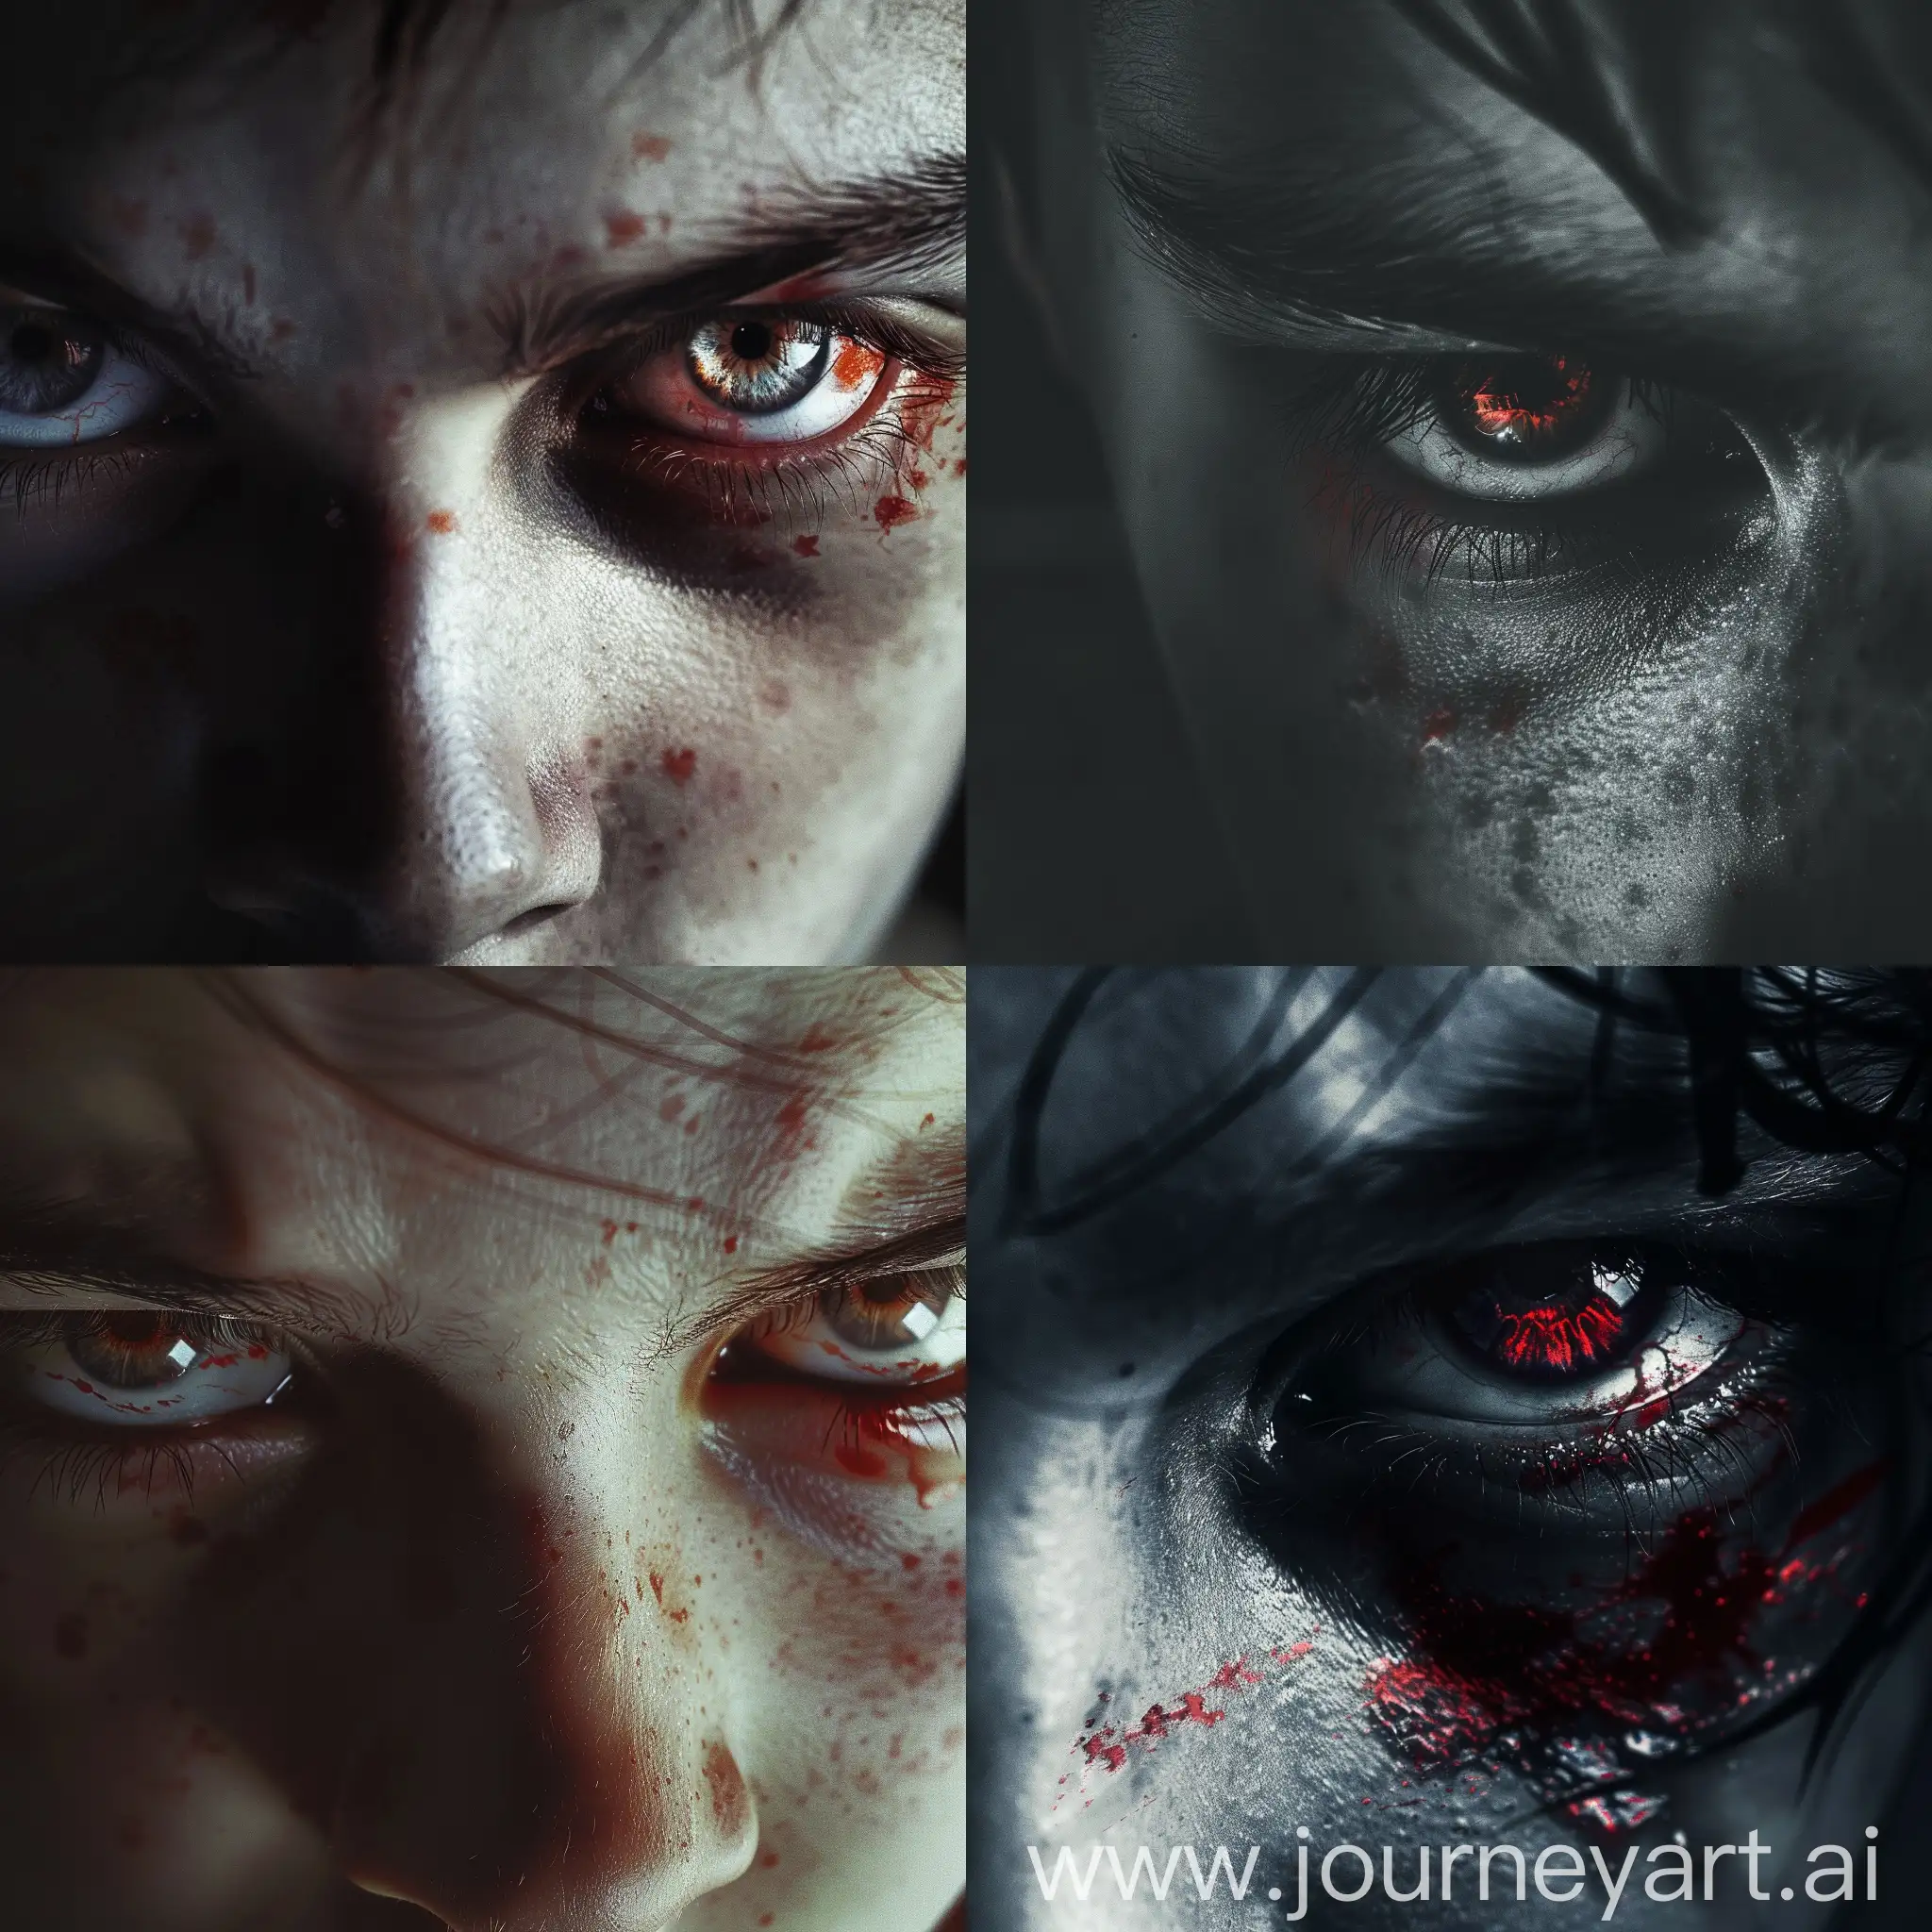 Bloody Eyes of a teenage boy dark, they eyes are filled with anxiety, anger, loneliness, and lot of anger